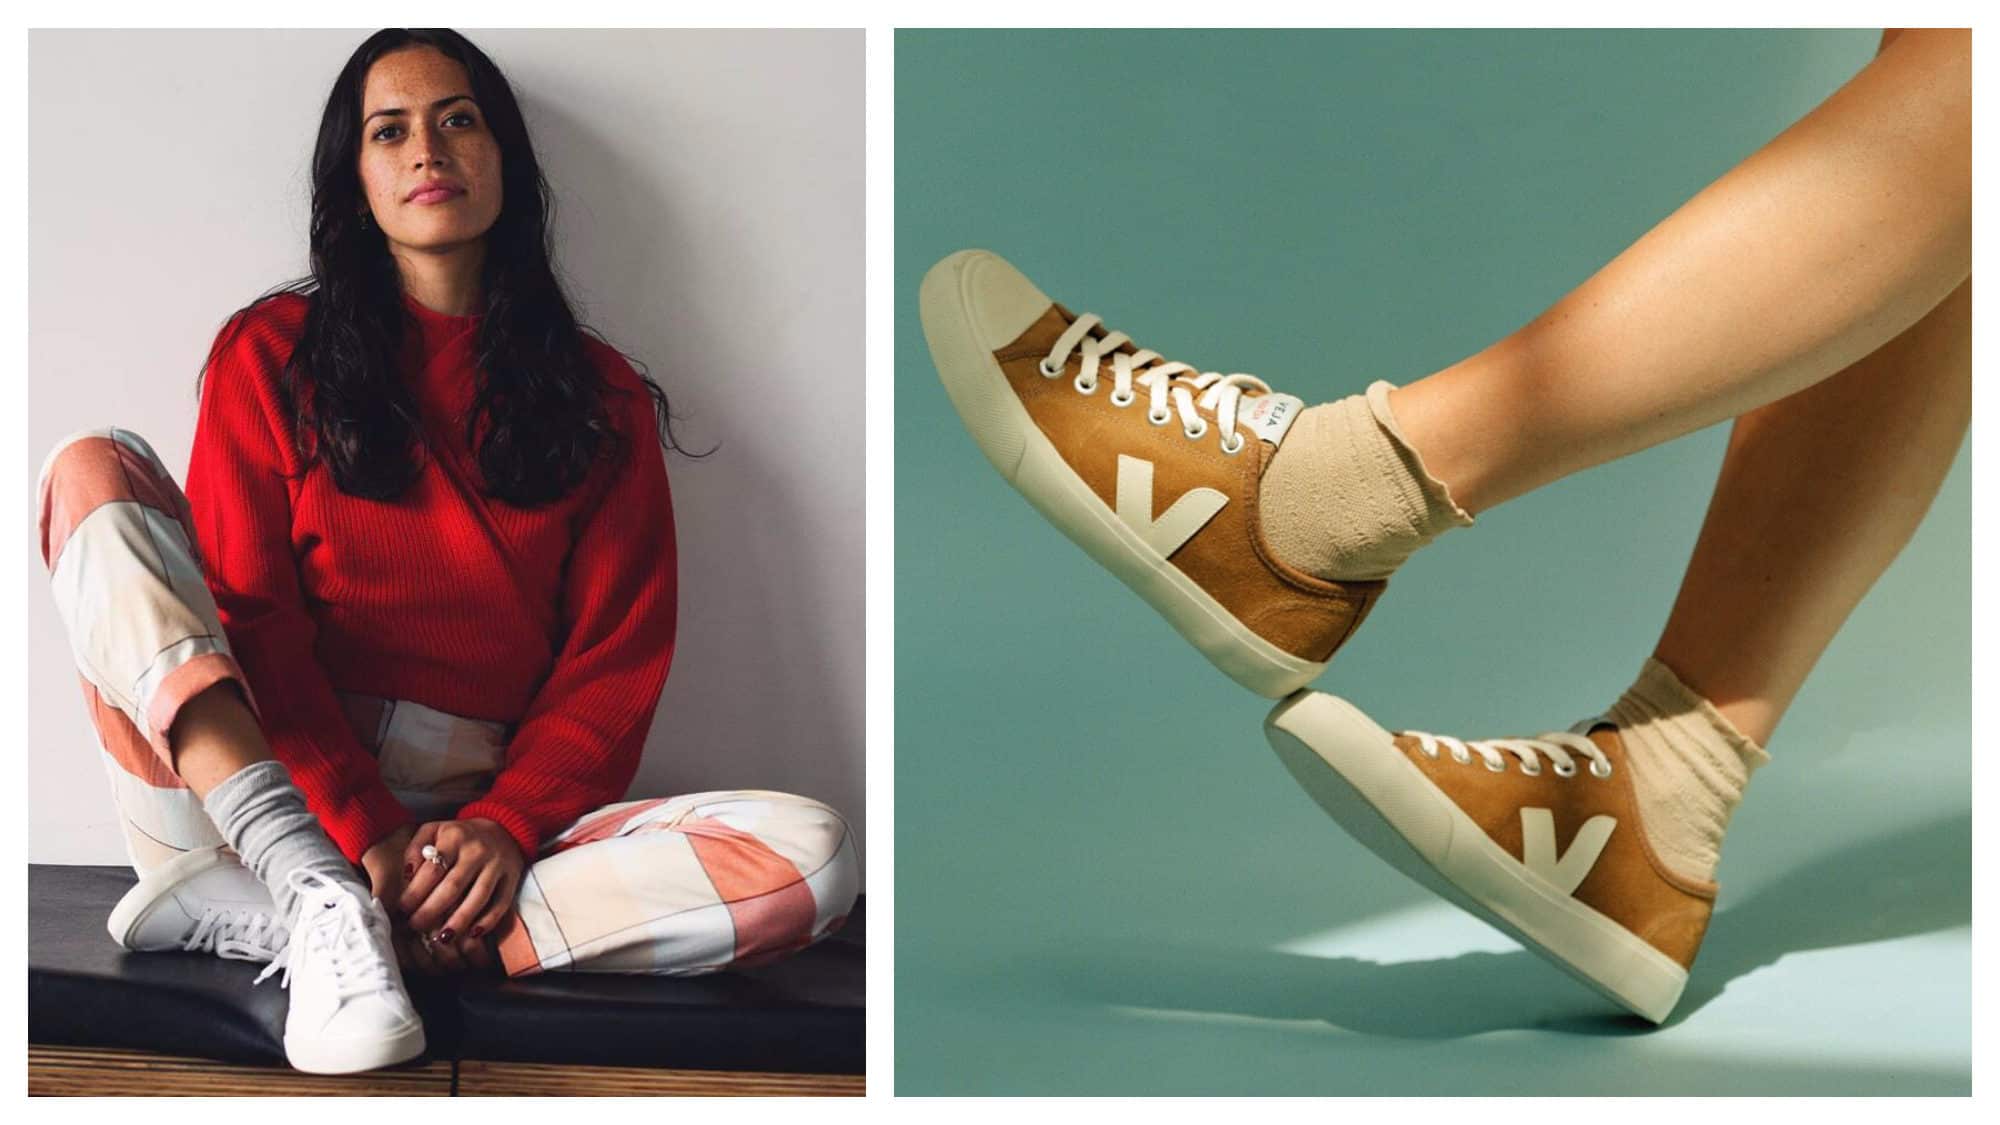 Veja is one of the brands you should know about if you want to get that Parisian fashion style, as they are sustainably made and versatile, like this white pair teamed with white trousers and red top (left) or these mustard-colored sneakers worn with cropped socks (right).